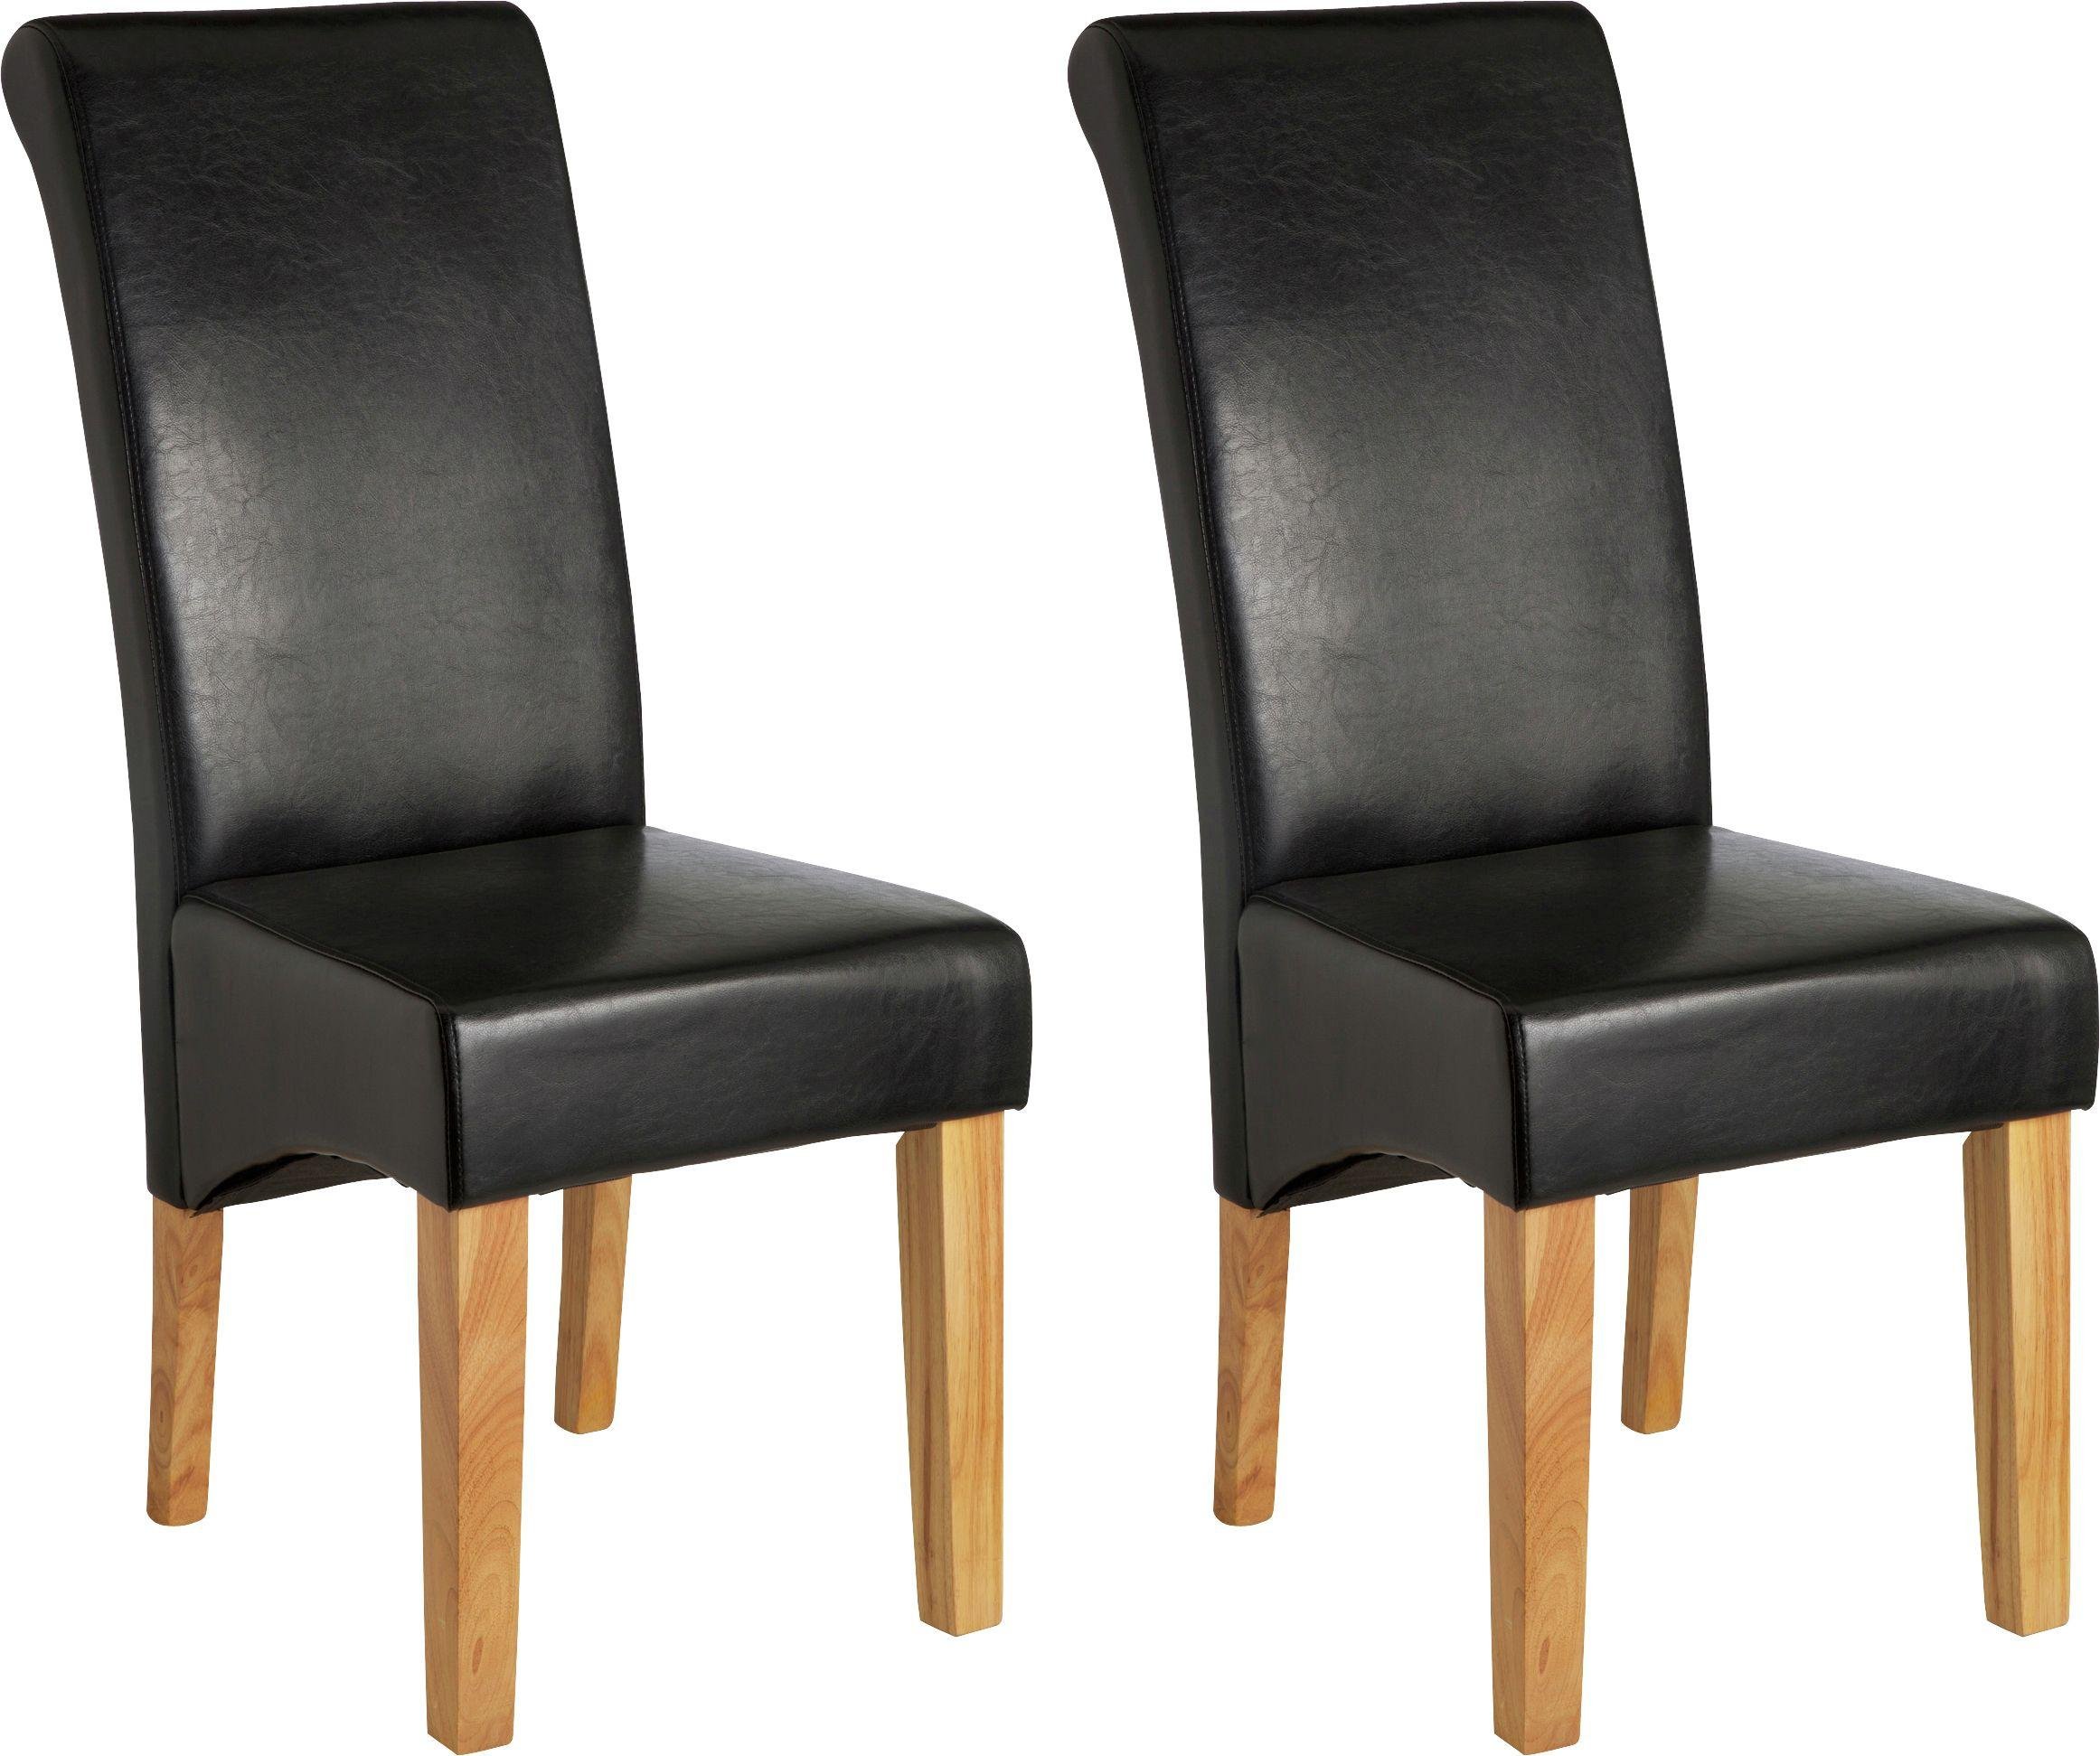 Argos Home Pair of Leather Effect Scrollback Chairs - Black